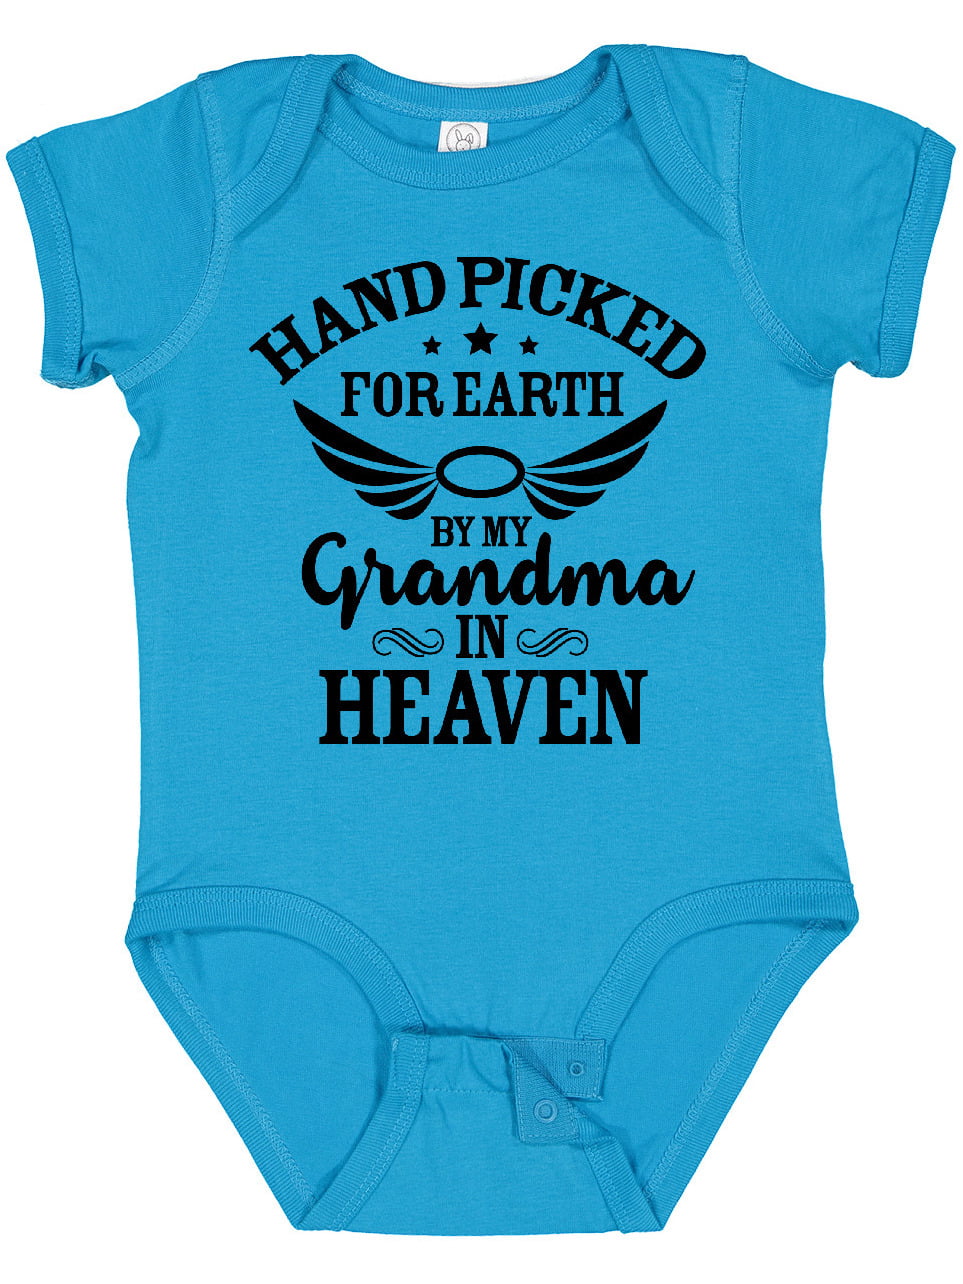 Embroidered Bodysuit Handpicked for Earth by my Grandma in Heaven Baby Shower Gift Pink Hand Picked Bodysuit 